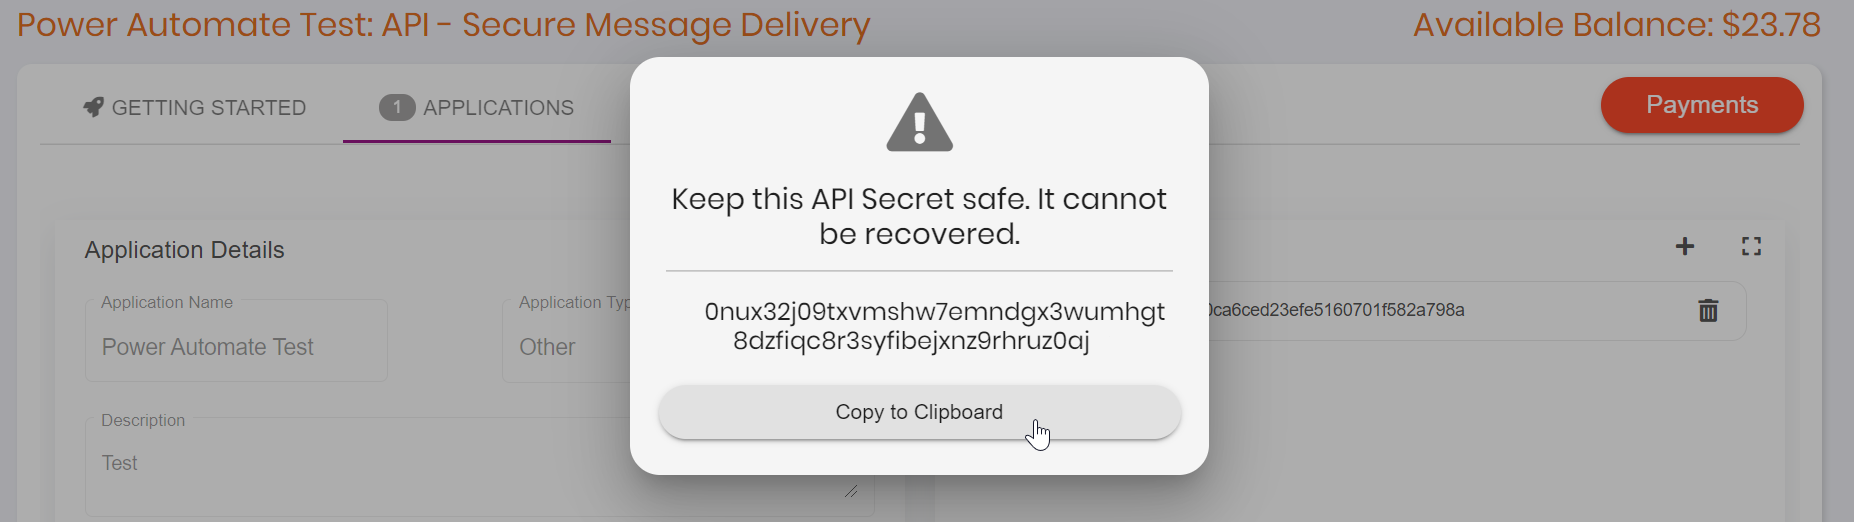 Get your API secret clicking the (+) sign in the center of the 'API Keys' section